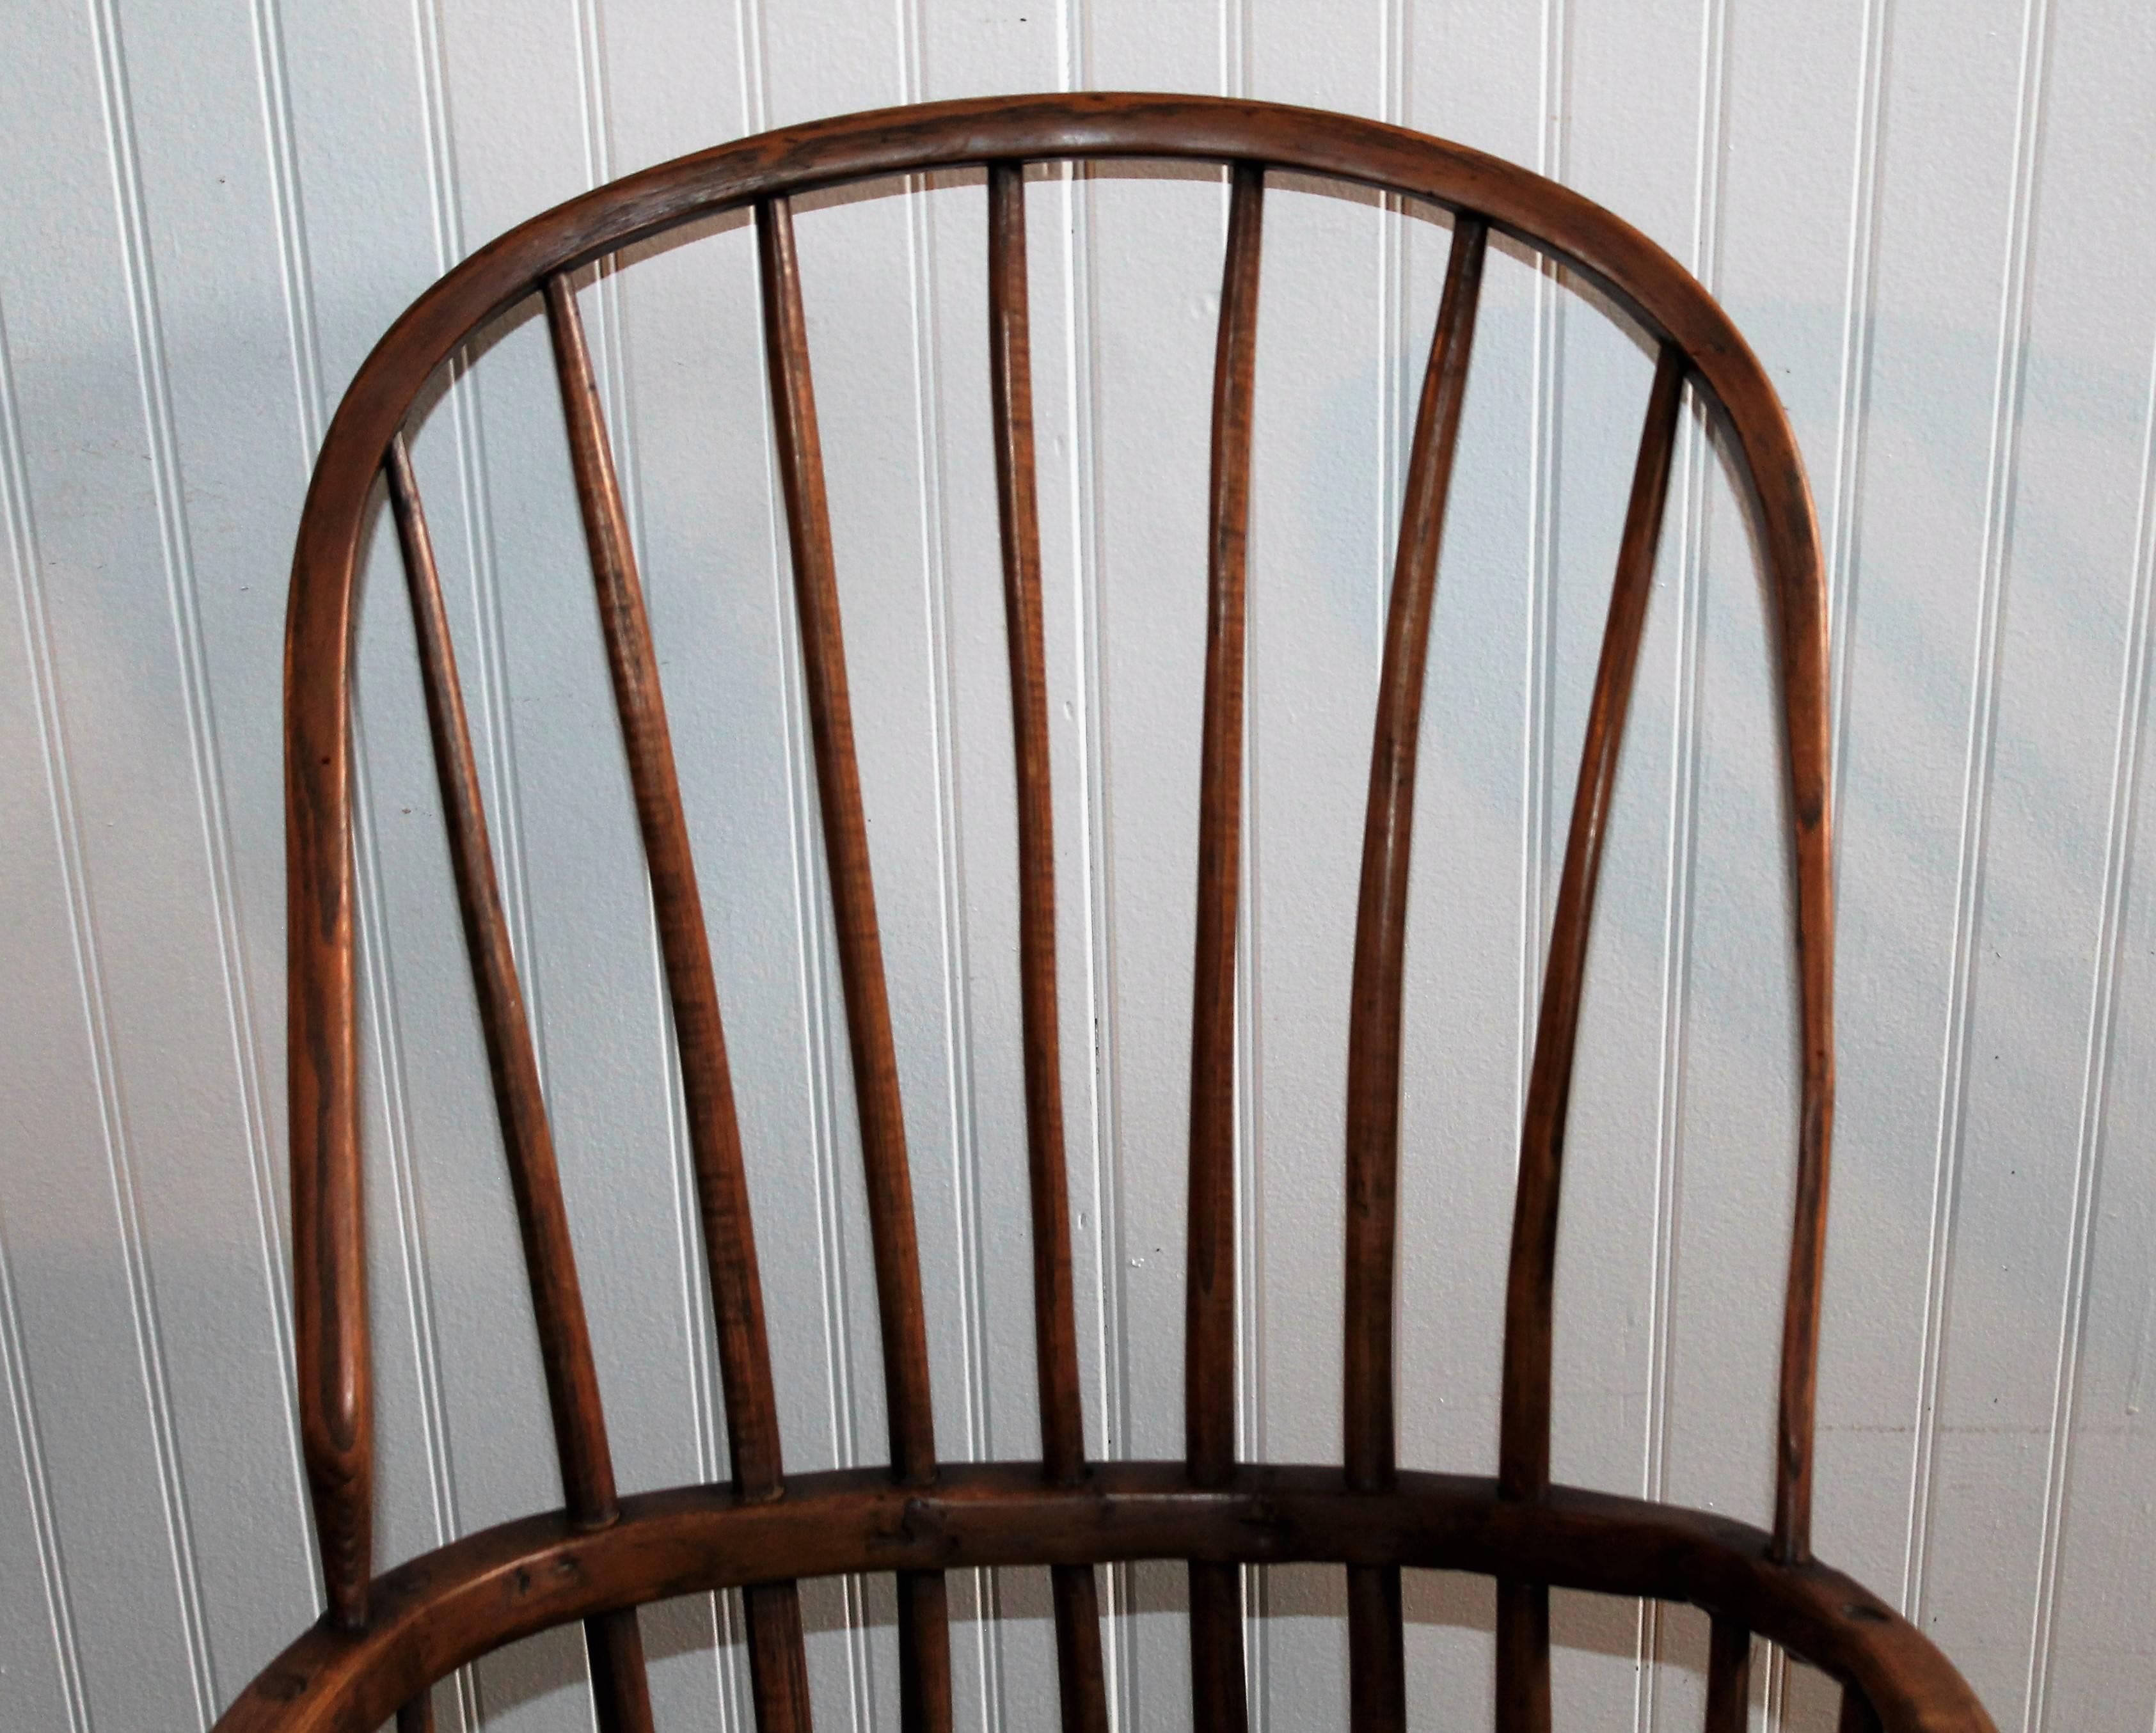 This extended arm high back Windsor chair is in very good and sturdy condition. This wonderful bow back has a great untouched surface. The seat height- 14 in. The spindles are some what folky as it is clear that it is a hand-carved chair.